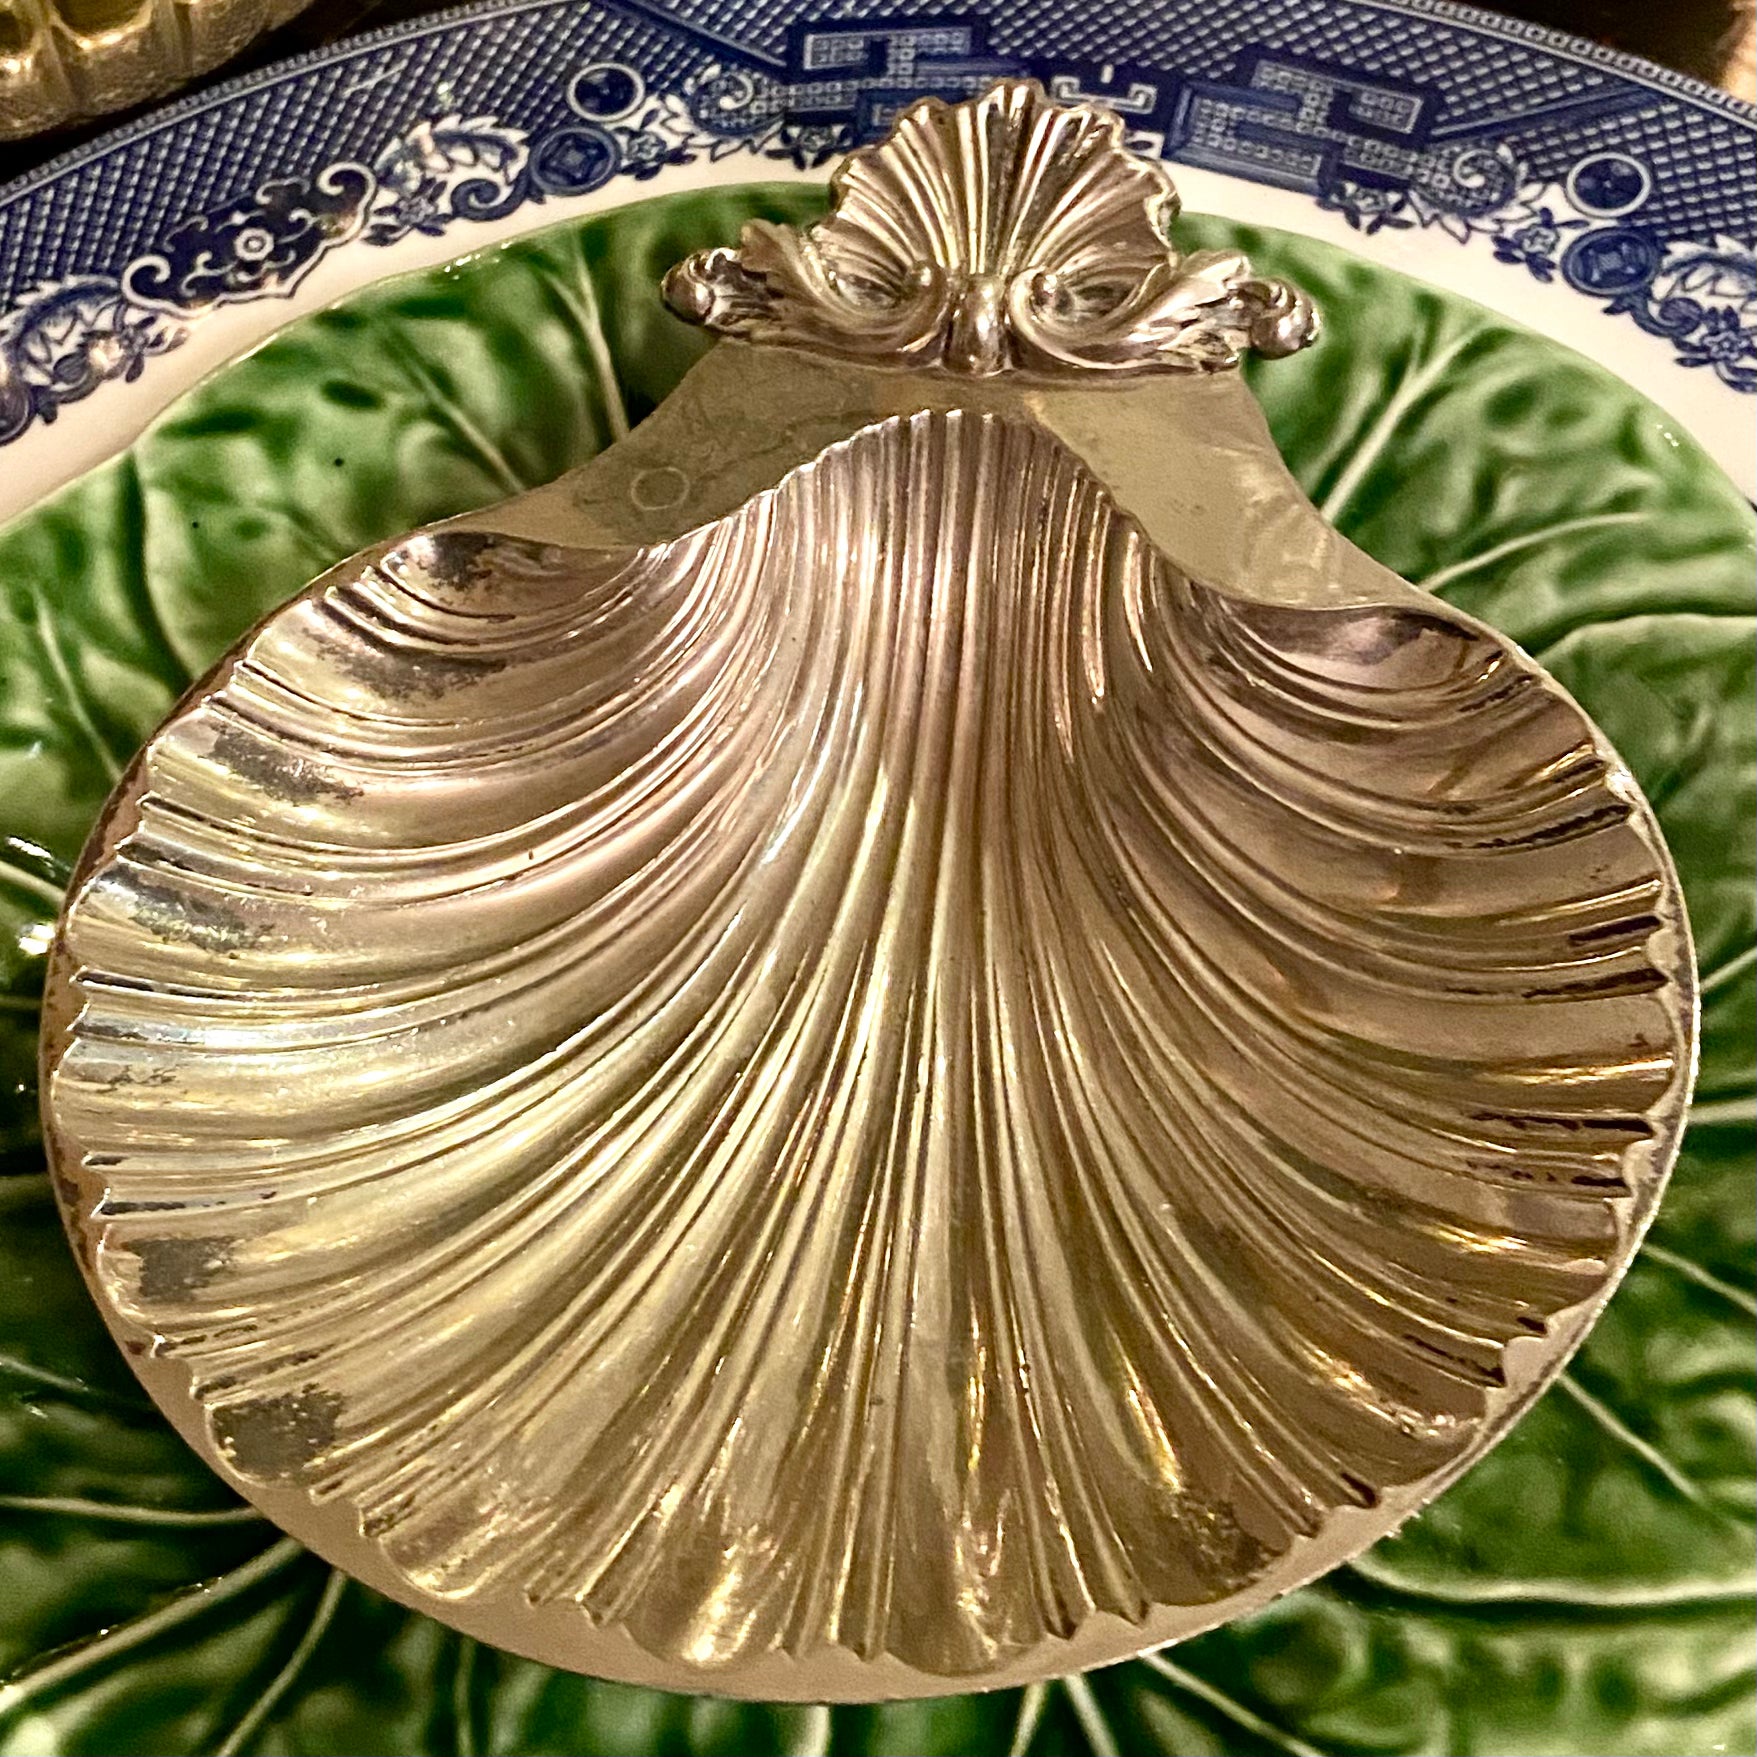 Chic palm beach regency silver plate footed vintage clam shell trinket dish